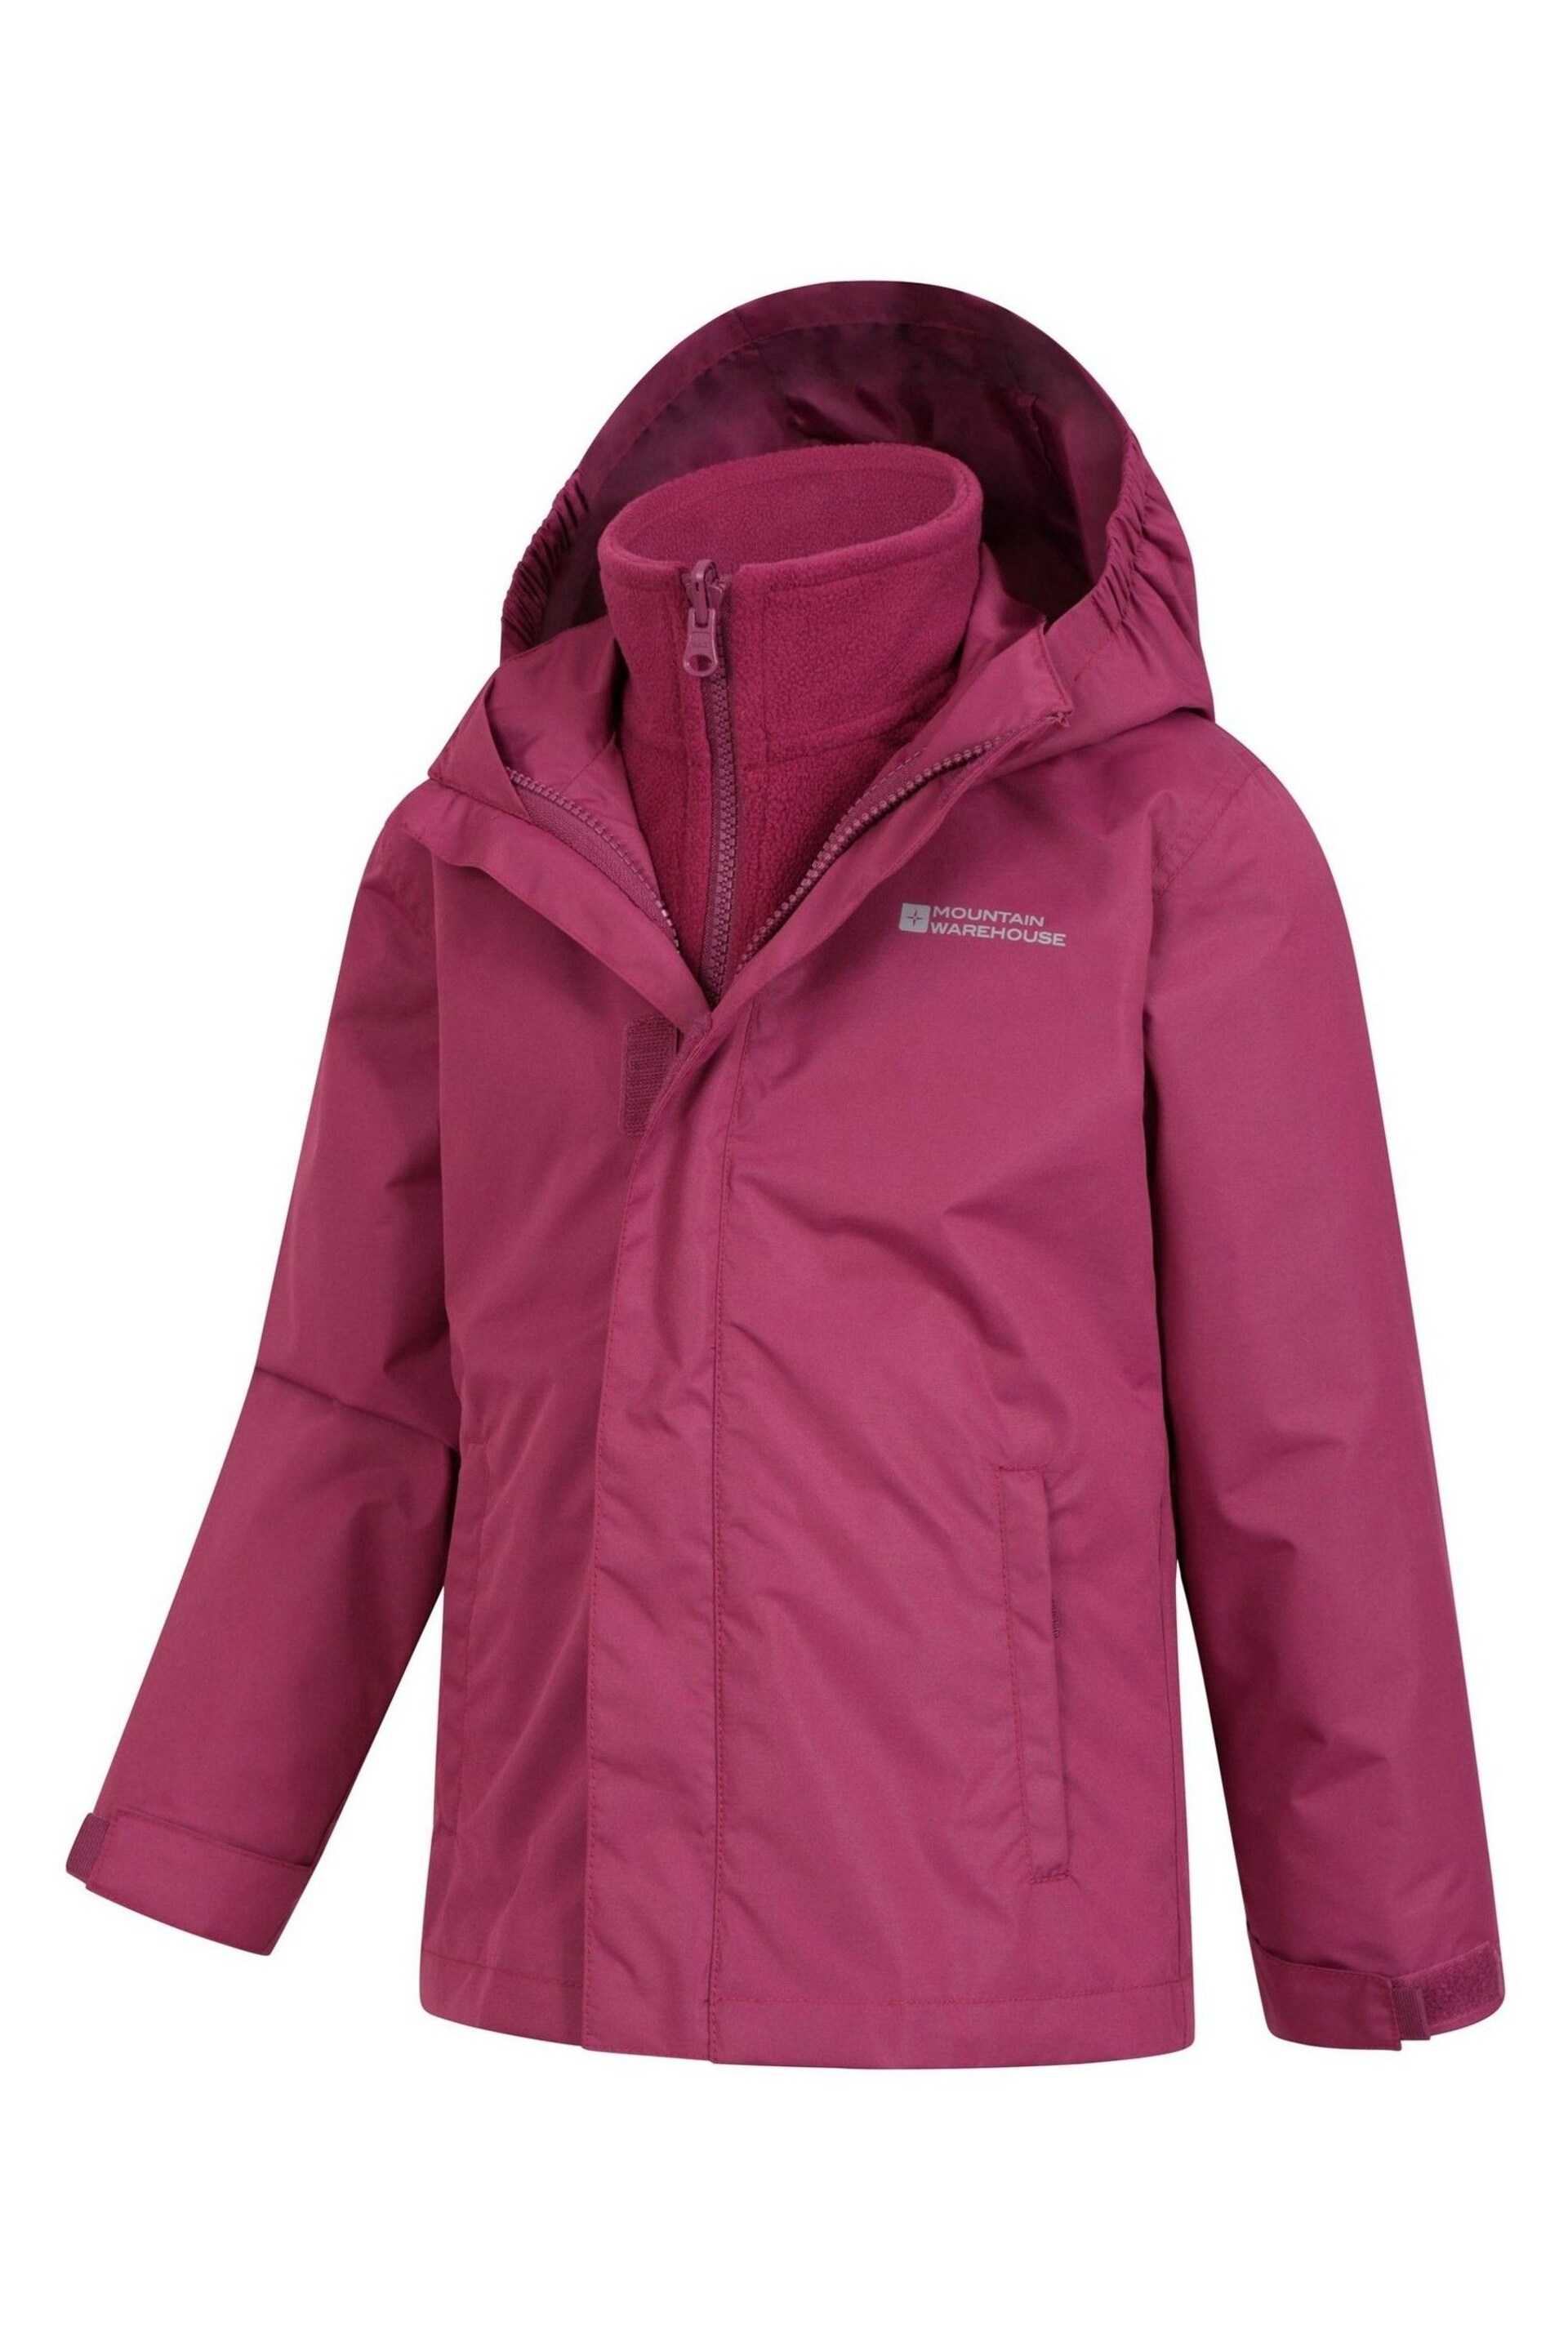 Mountain Warehouse Red Fell Kids 3 In 1 Water Resistant Jacket - Image 4 of 5